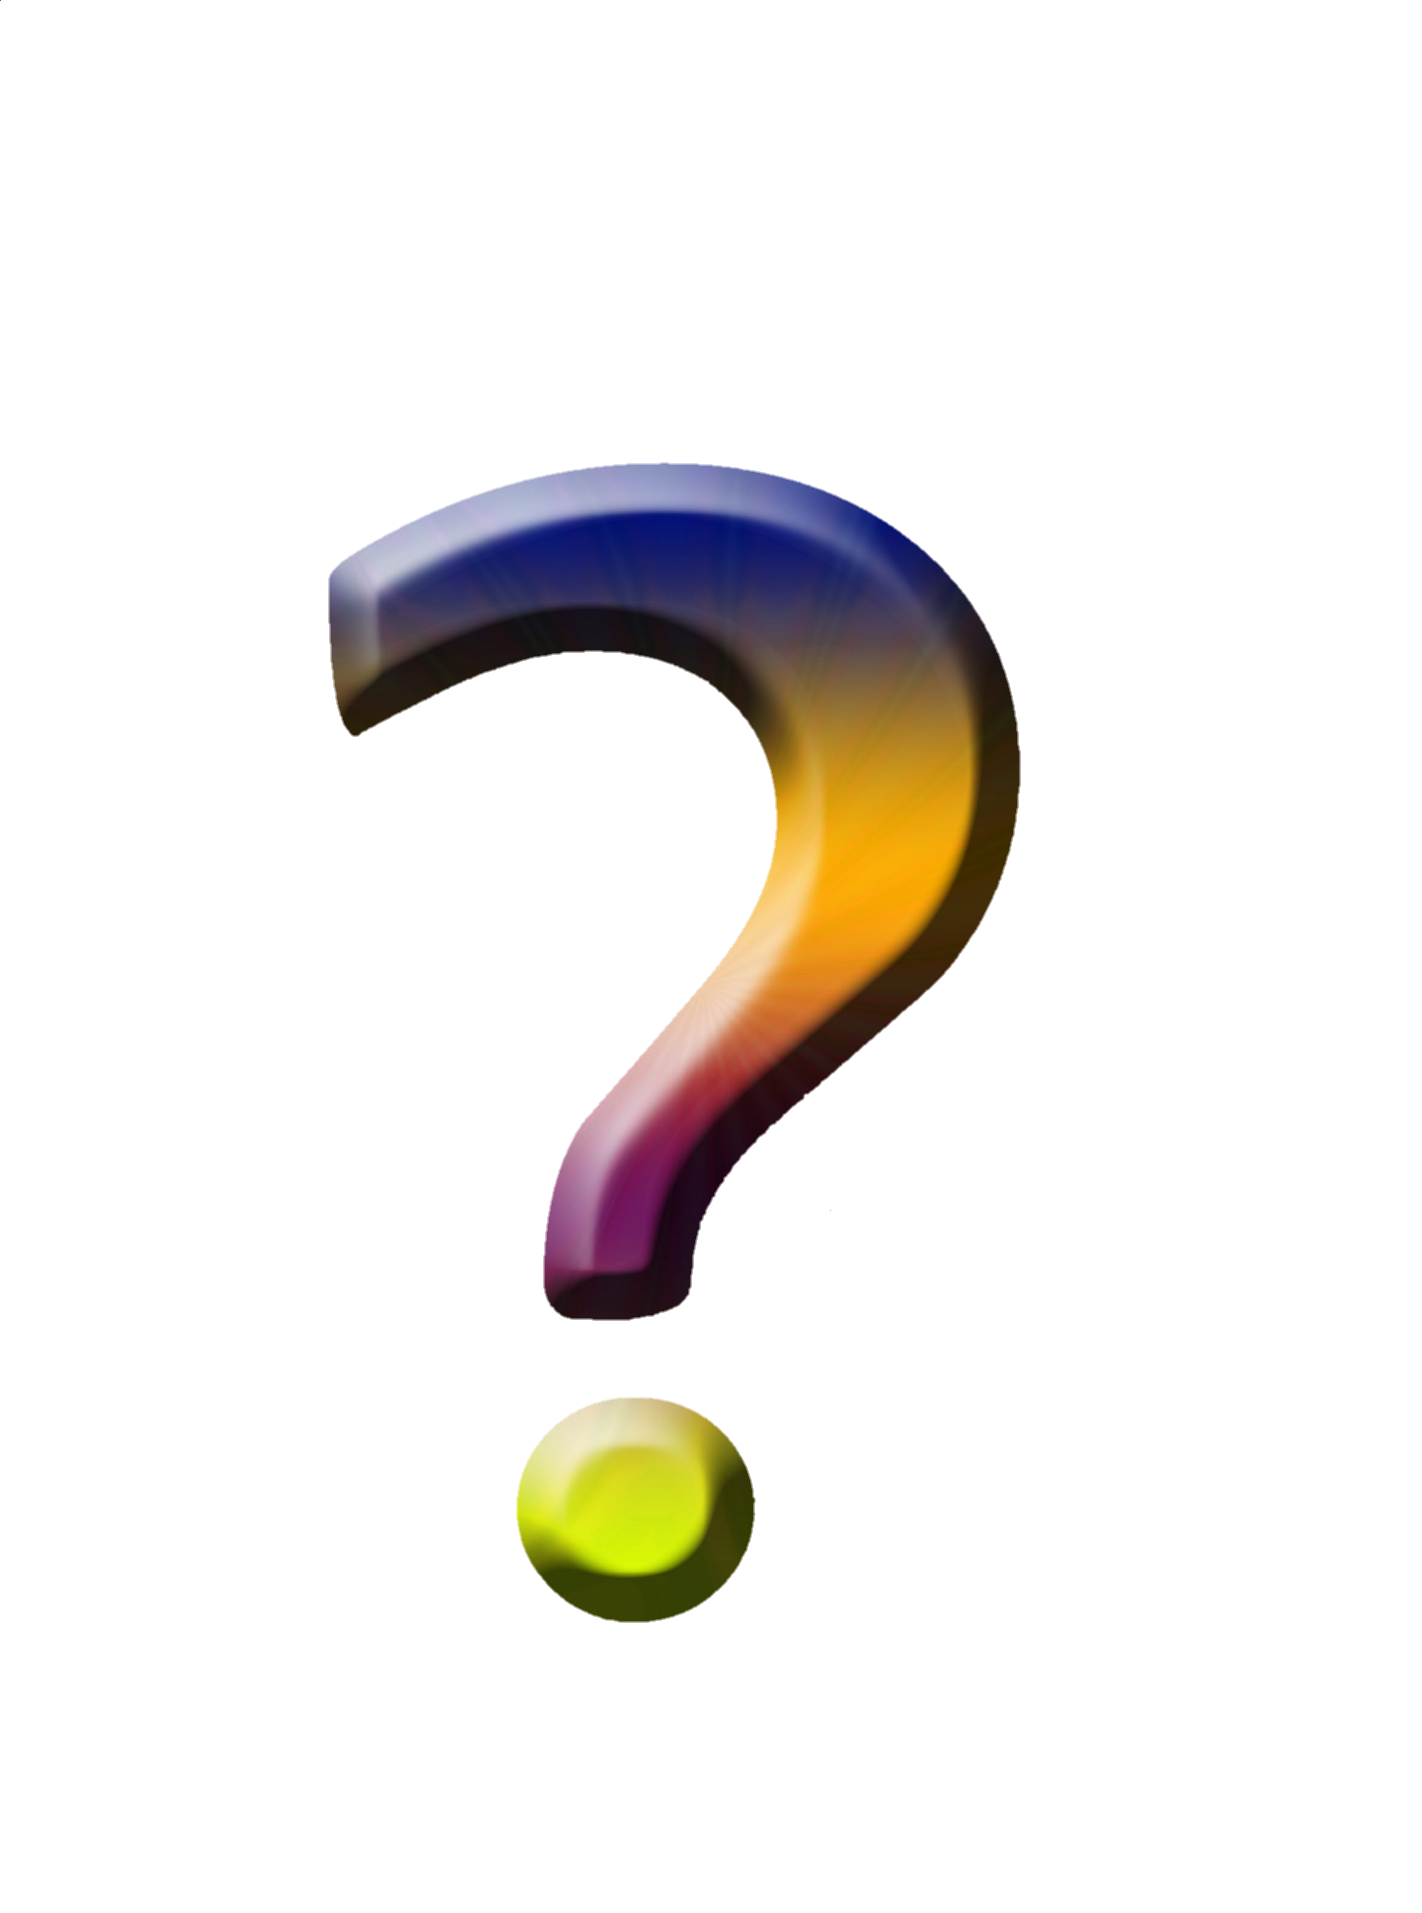 question-mark-png-from-pngfre-34-2